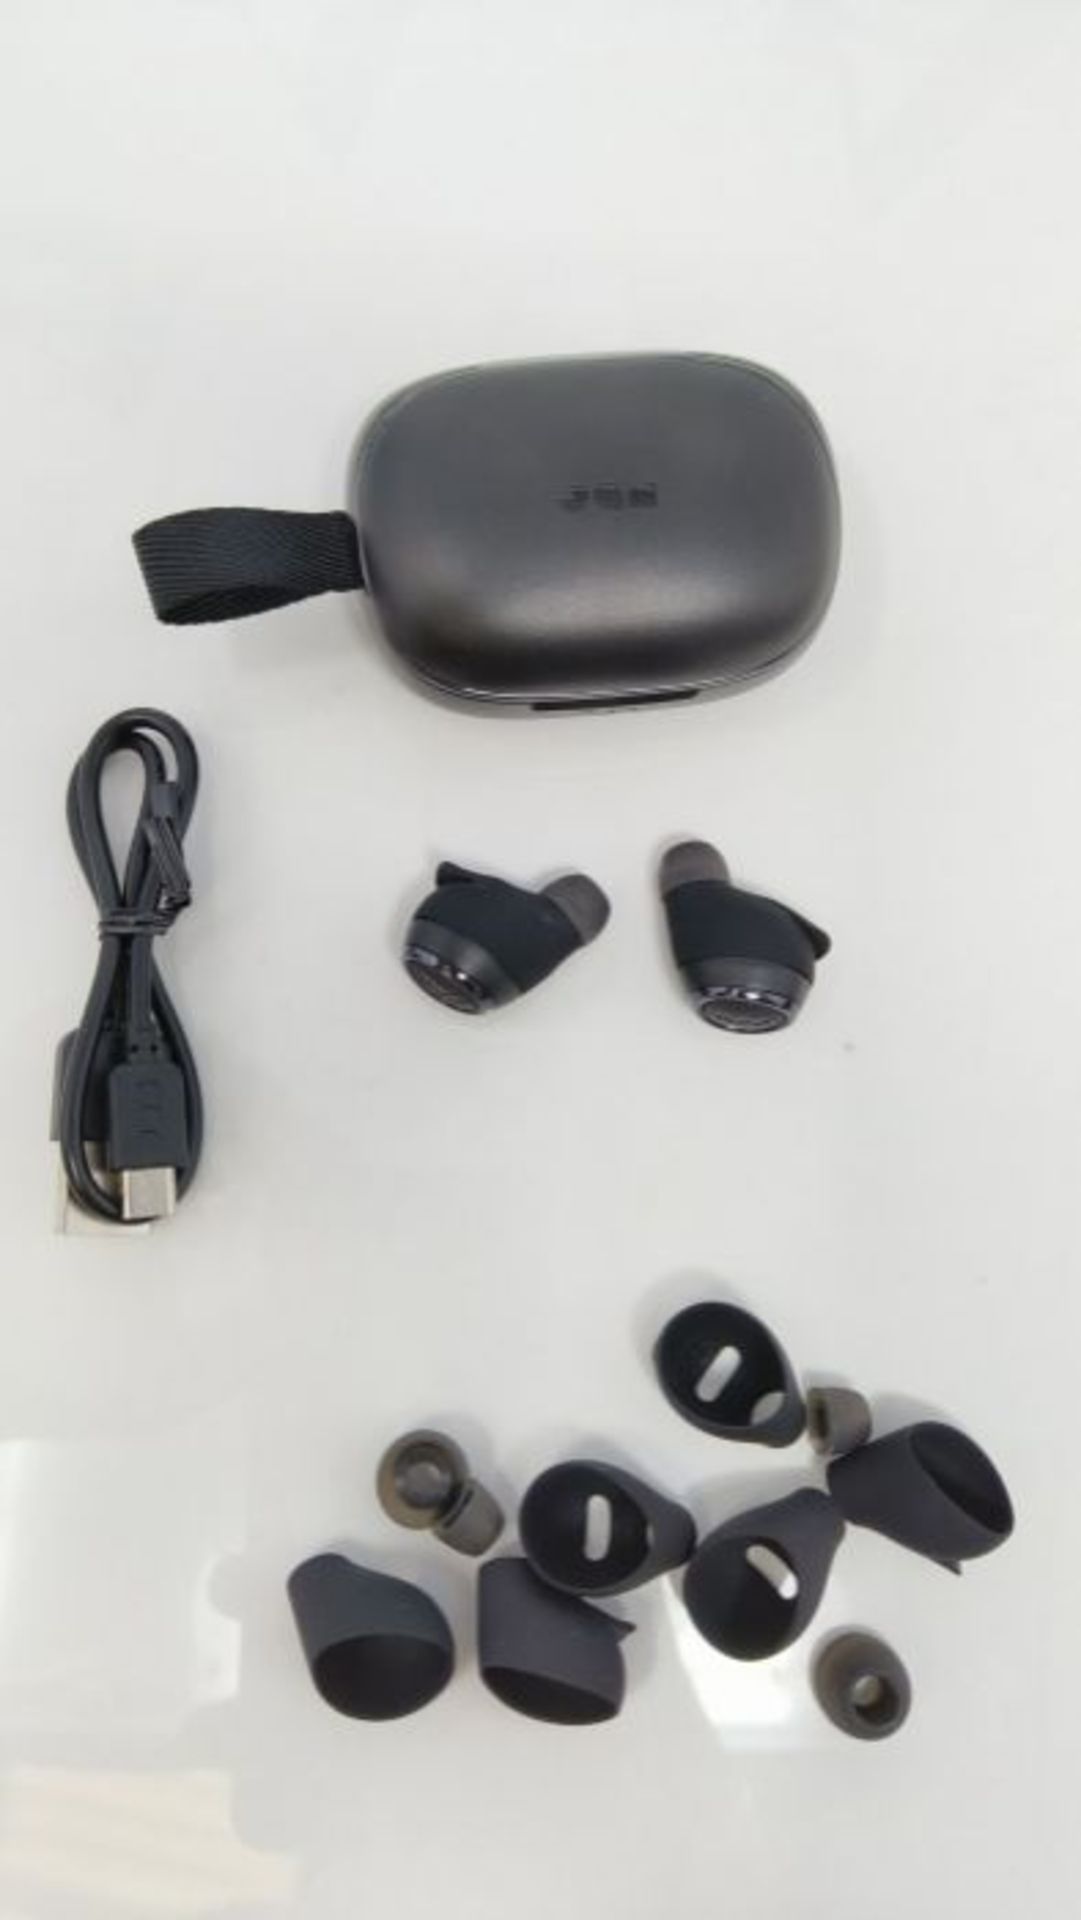 RRP £68.00 Jam Live Free TWS Earbuds - Wireless in-ear headphones with Bluetooth Connectivity, Up - Image 3 of 3